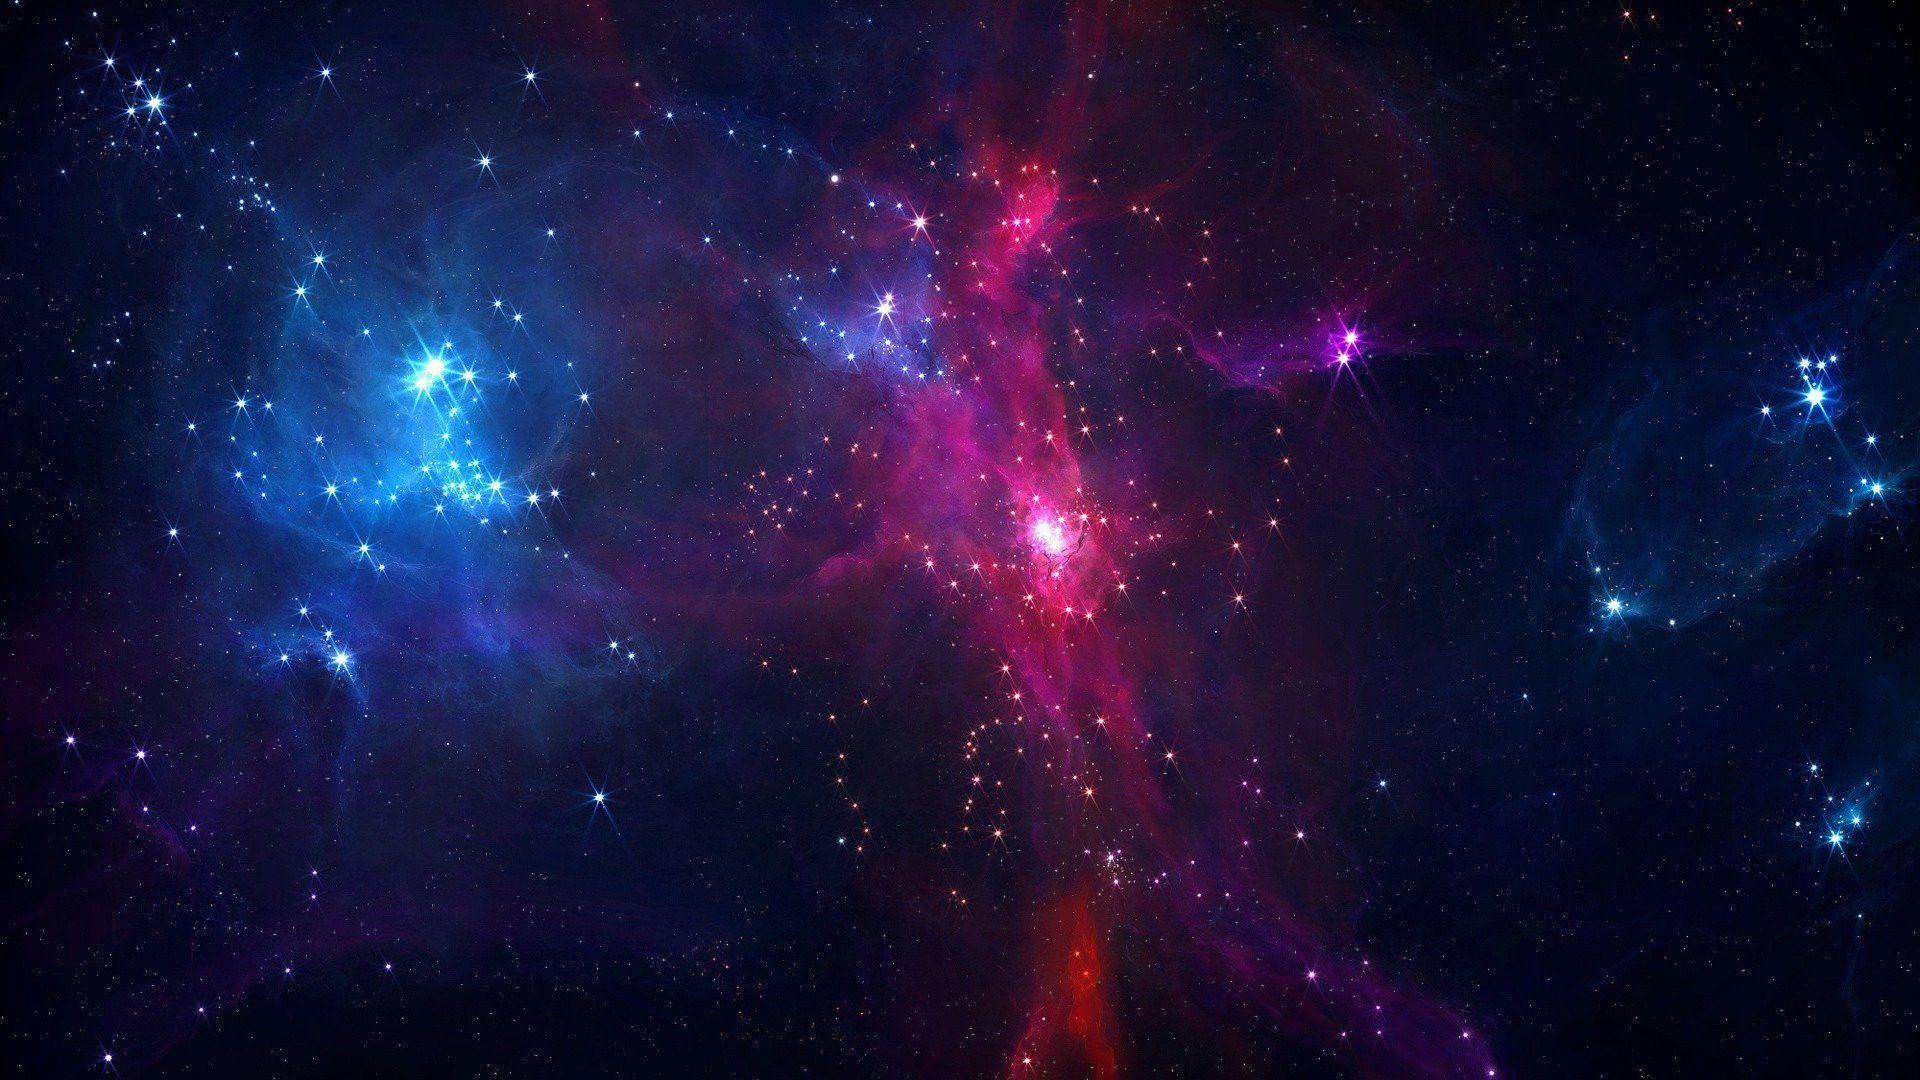 The colorful space wallpaper 1920x1080 - 1920x1080, galaxy, space